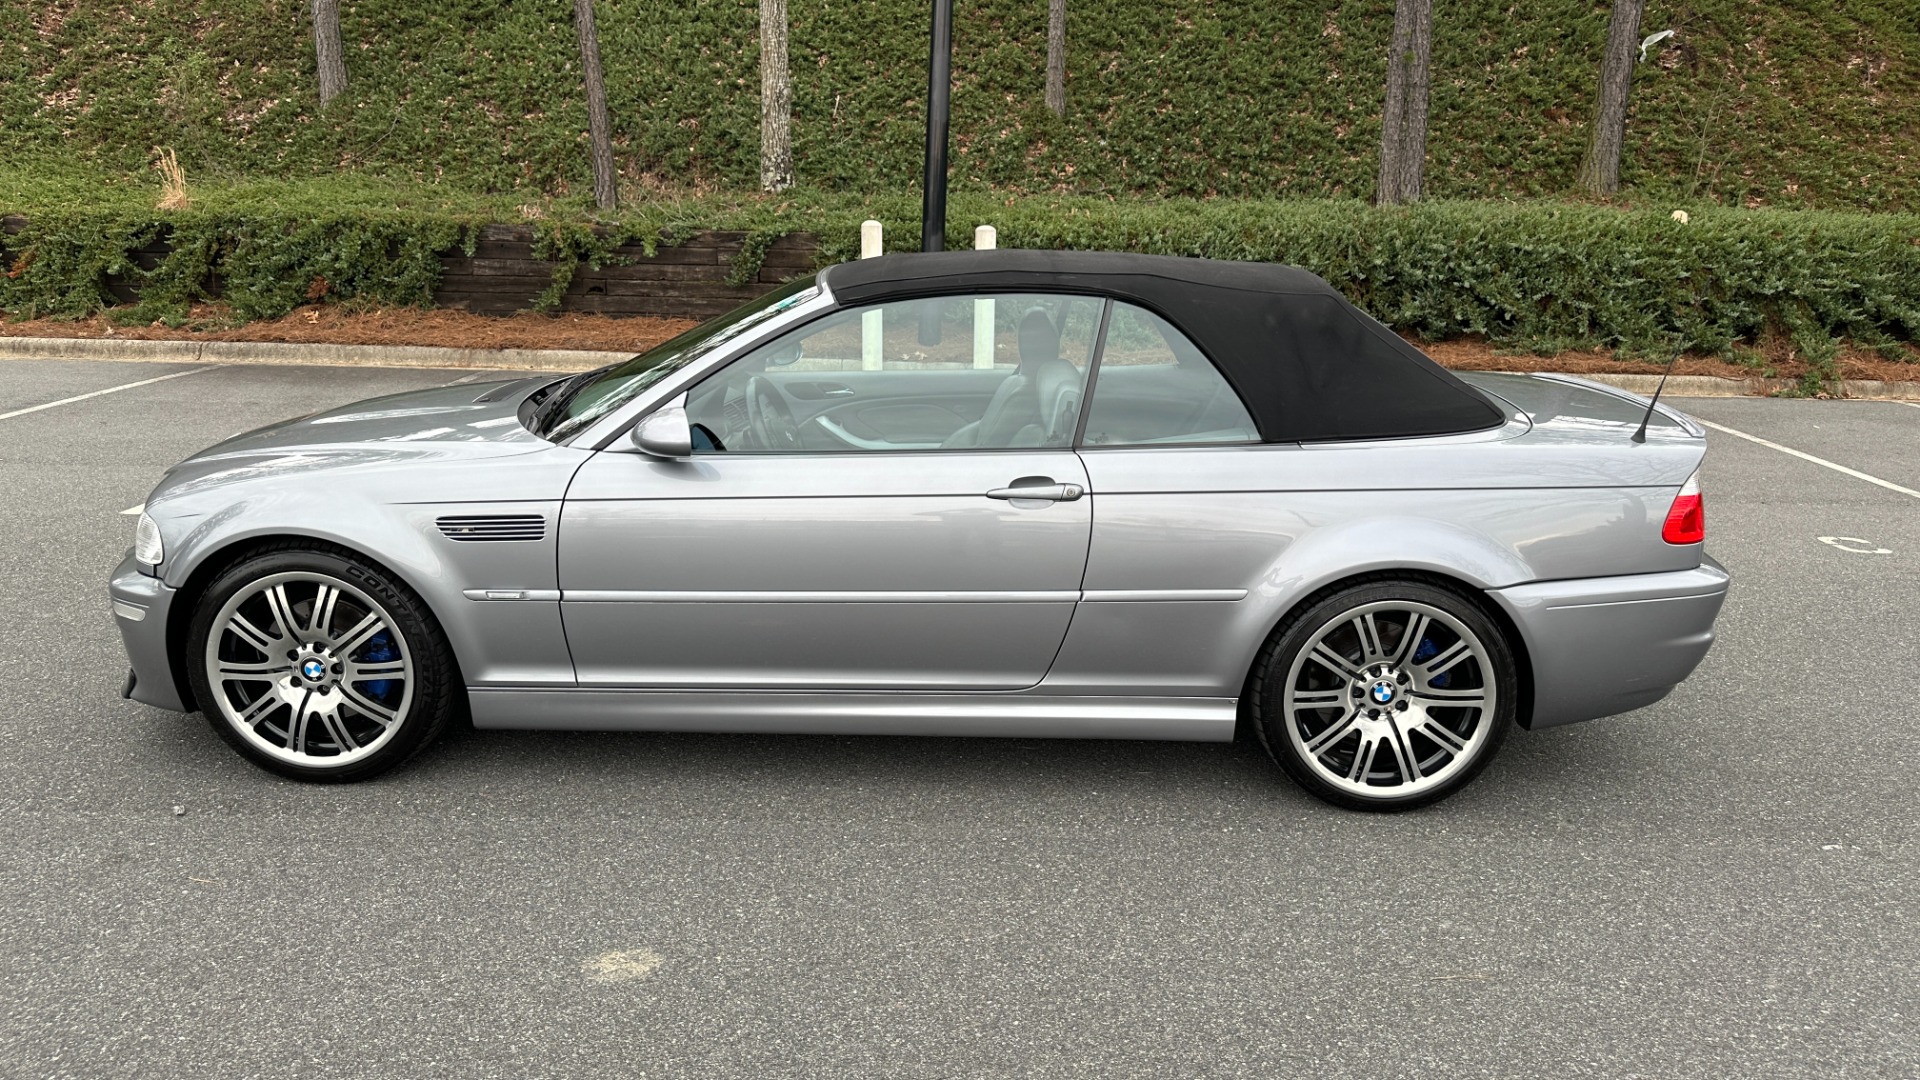 Used 2006 BMW M3 CONVERTIBLE / SMG AUTO / LEATHER / INLINE 6CYL / CARBON FIBER for sale $26,595 at Formula Imports in Charlotte NC 28227 37